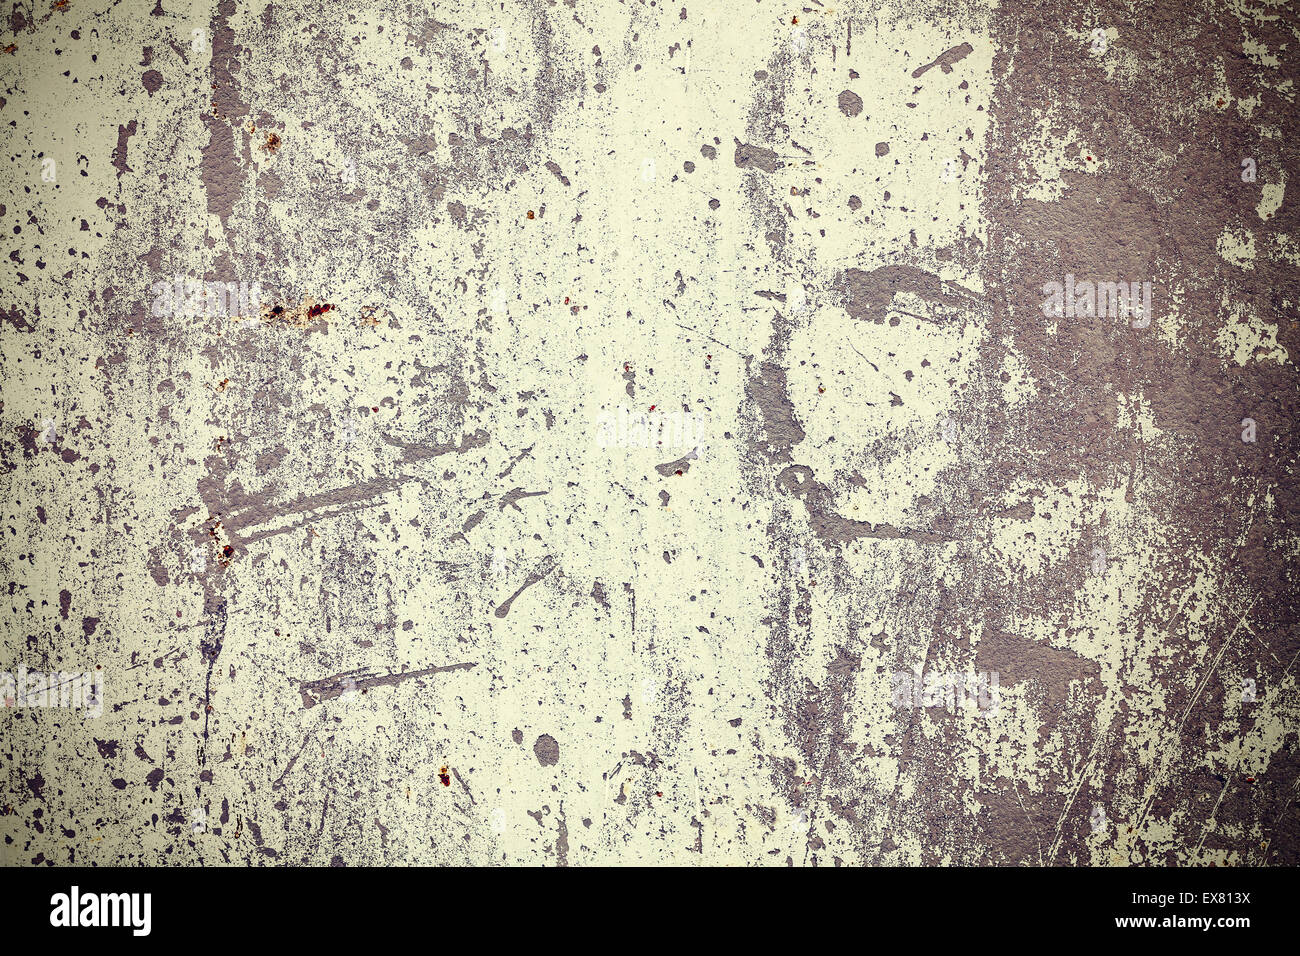 Background or texture of the old cracked wall with peeling paint. Stock Photo